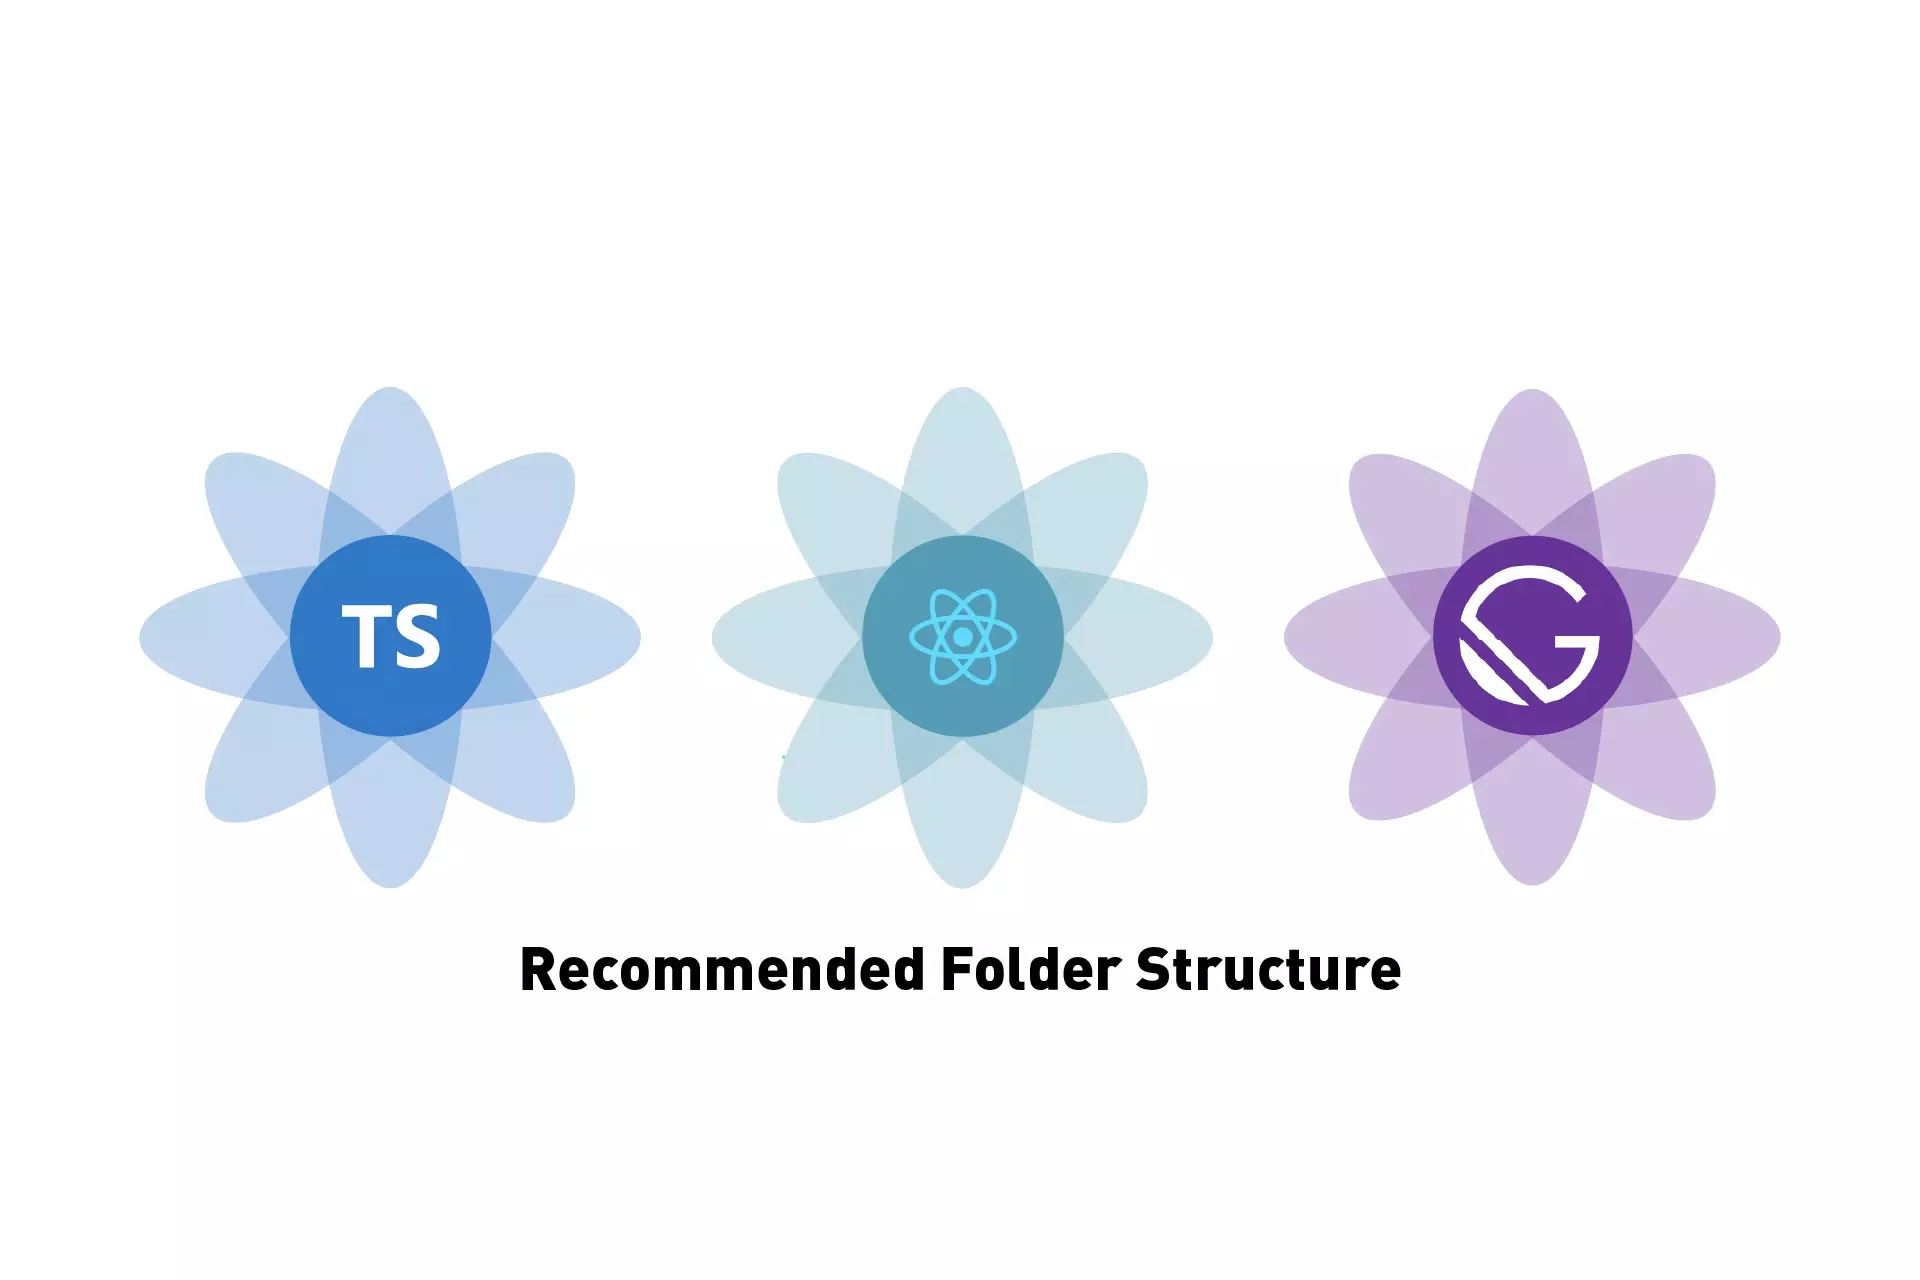 Three flowers side by side that represent Typescript, ReactJS and GatsbyJS. Beneath them sits the text "Recommended Folder Structure".